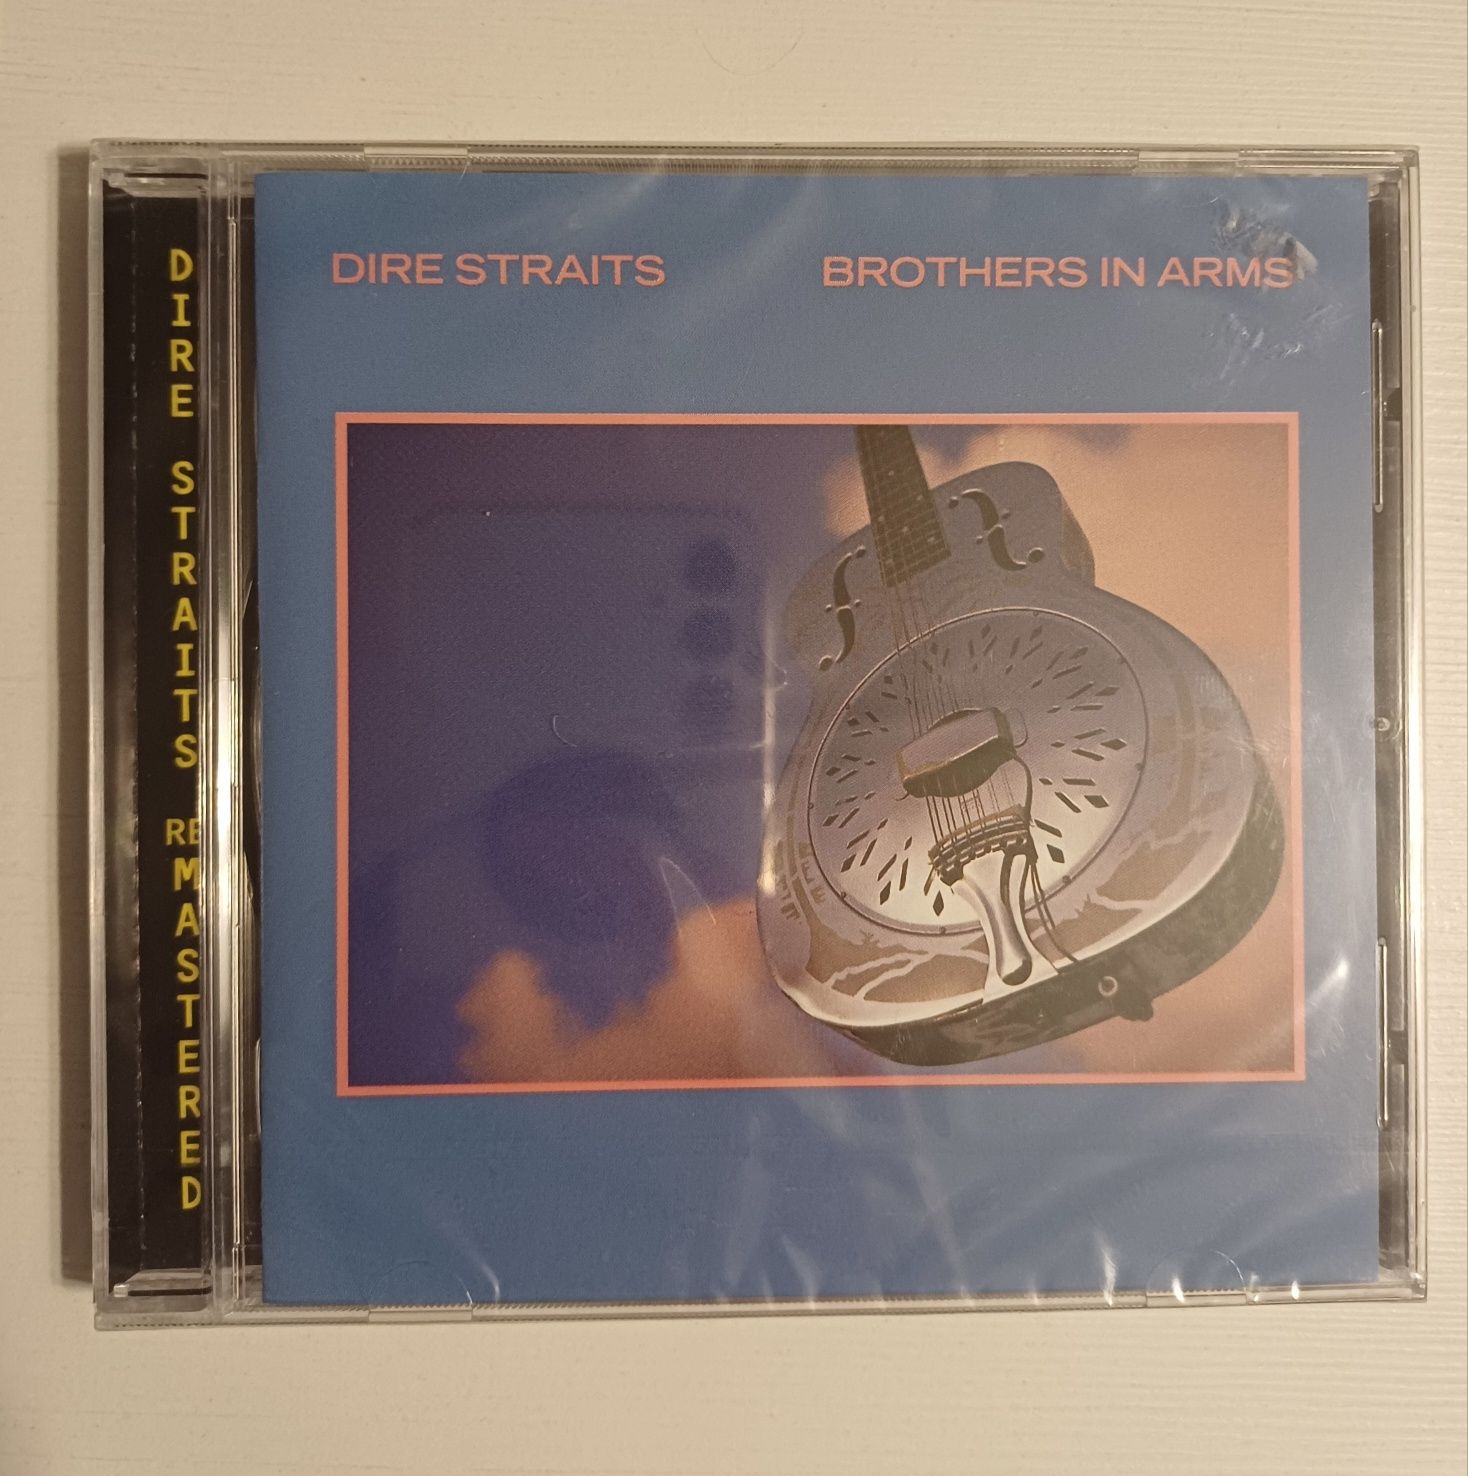 Dire Straits - Brothers in Arms - Nowa